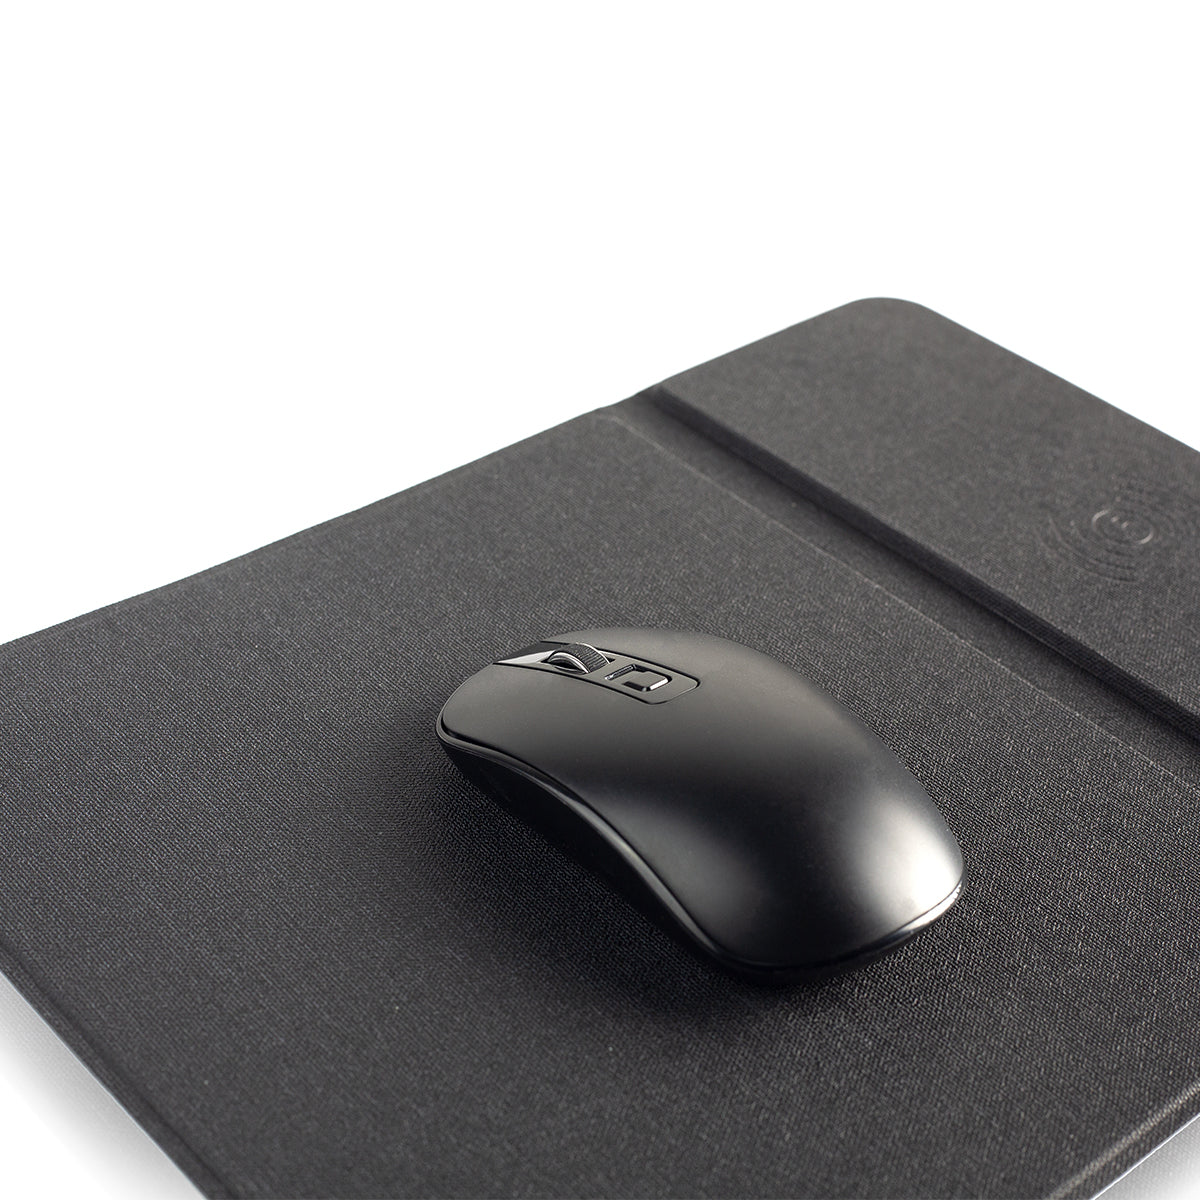 Indiid Combo Mouse pad Pro